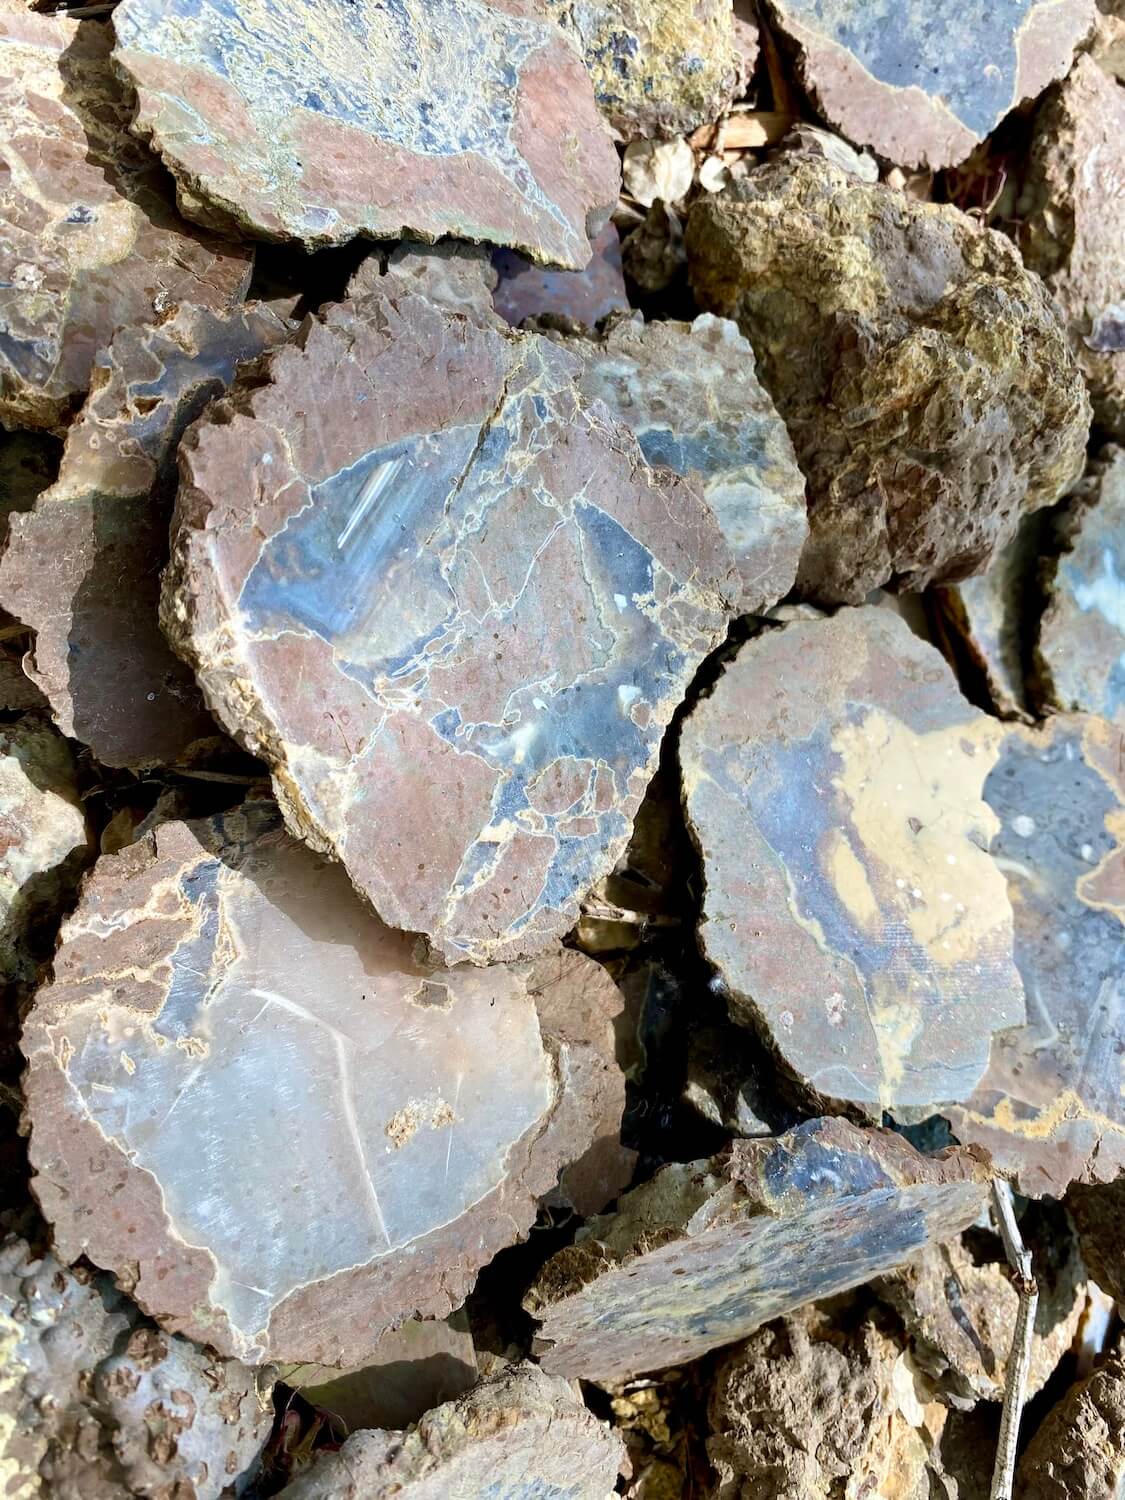 An up close shot of thunder eggs reveals the interesting geometric patterns of the tennis ball sized geodes.  There are patches of red, black, yellow and even rainbow. 